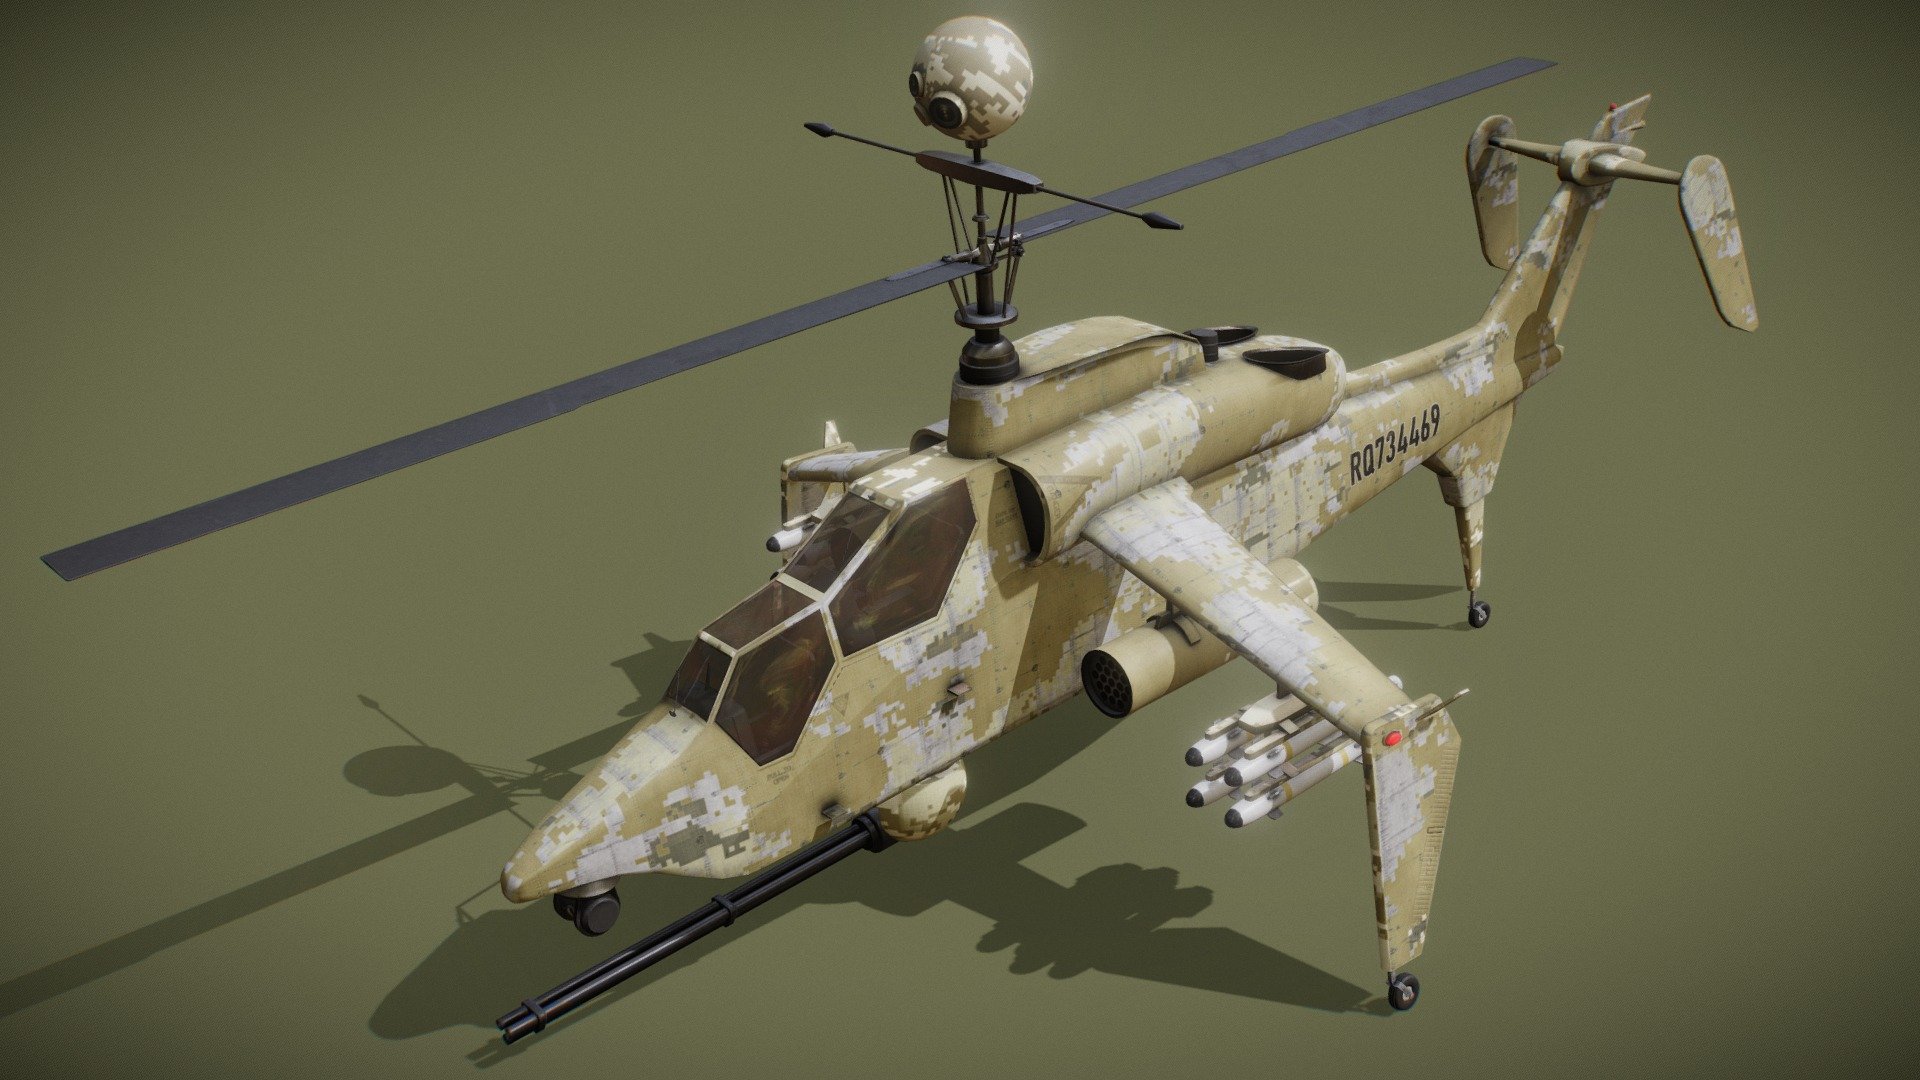 Futuristic Attack Helicopter Concept.

Low Poly and Game Ready

Model is devided in to 4 materials.
Fuselage and interior with 4k PBR textures.
Rotor and glass with 2k PBR textures.

Includes black paint job version

Both name &ldquo;AH-4 Navajo